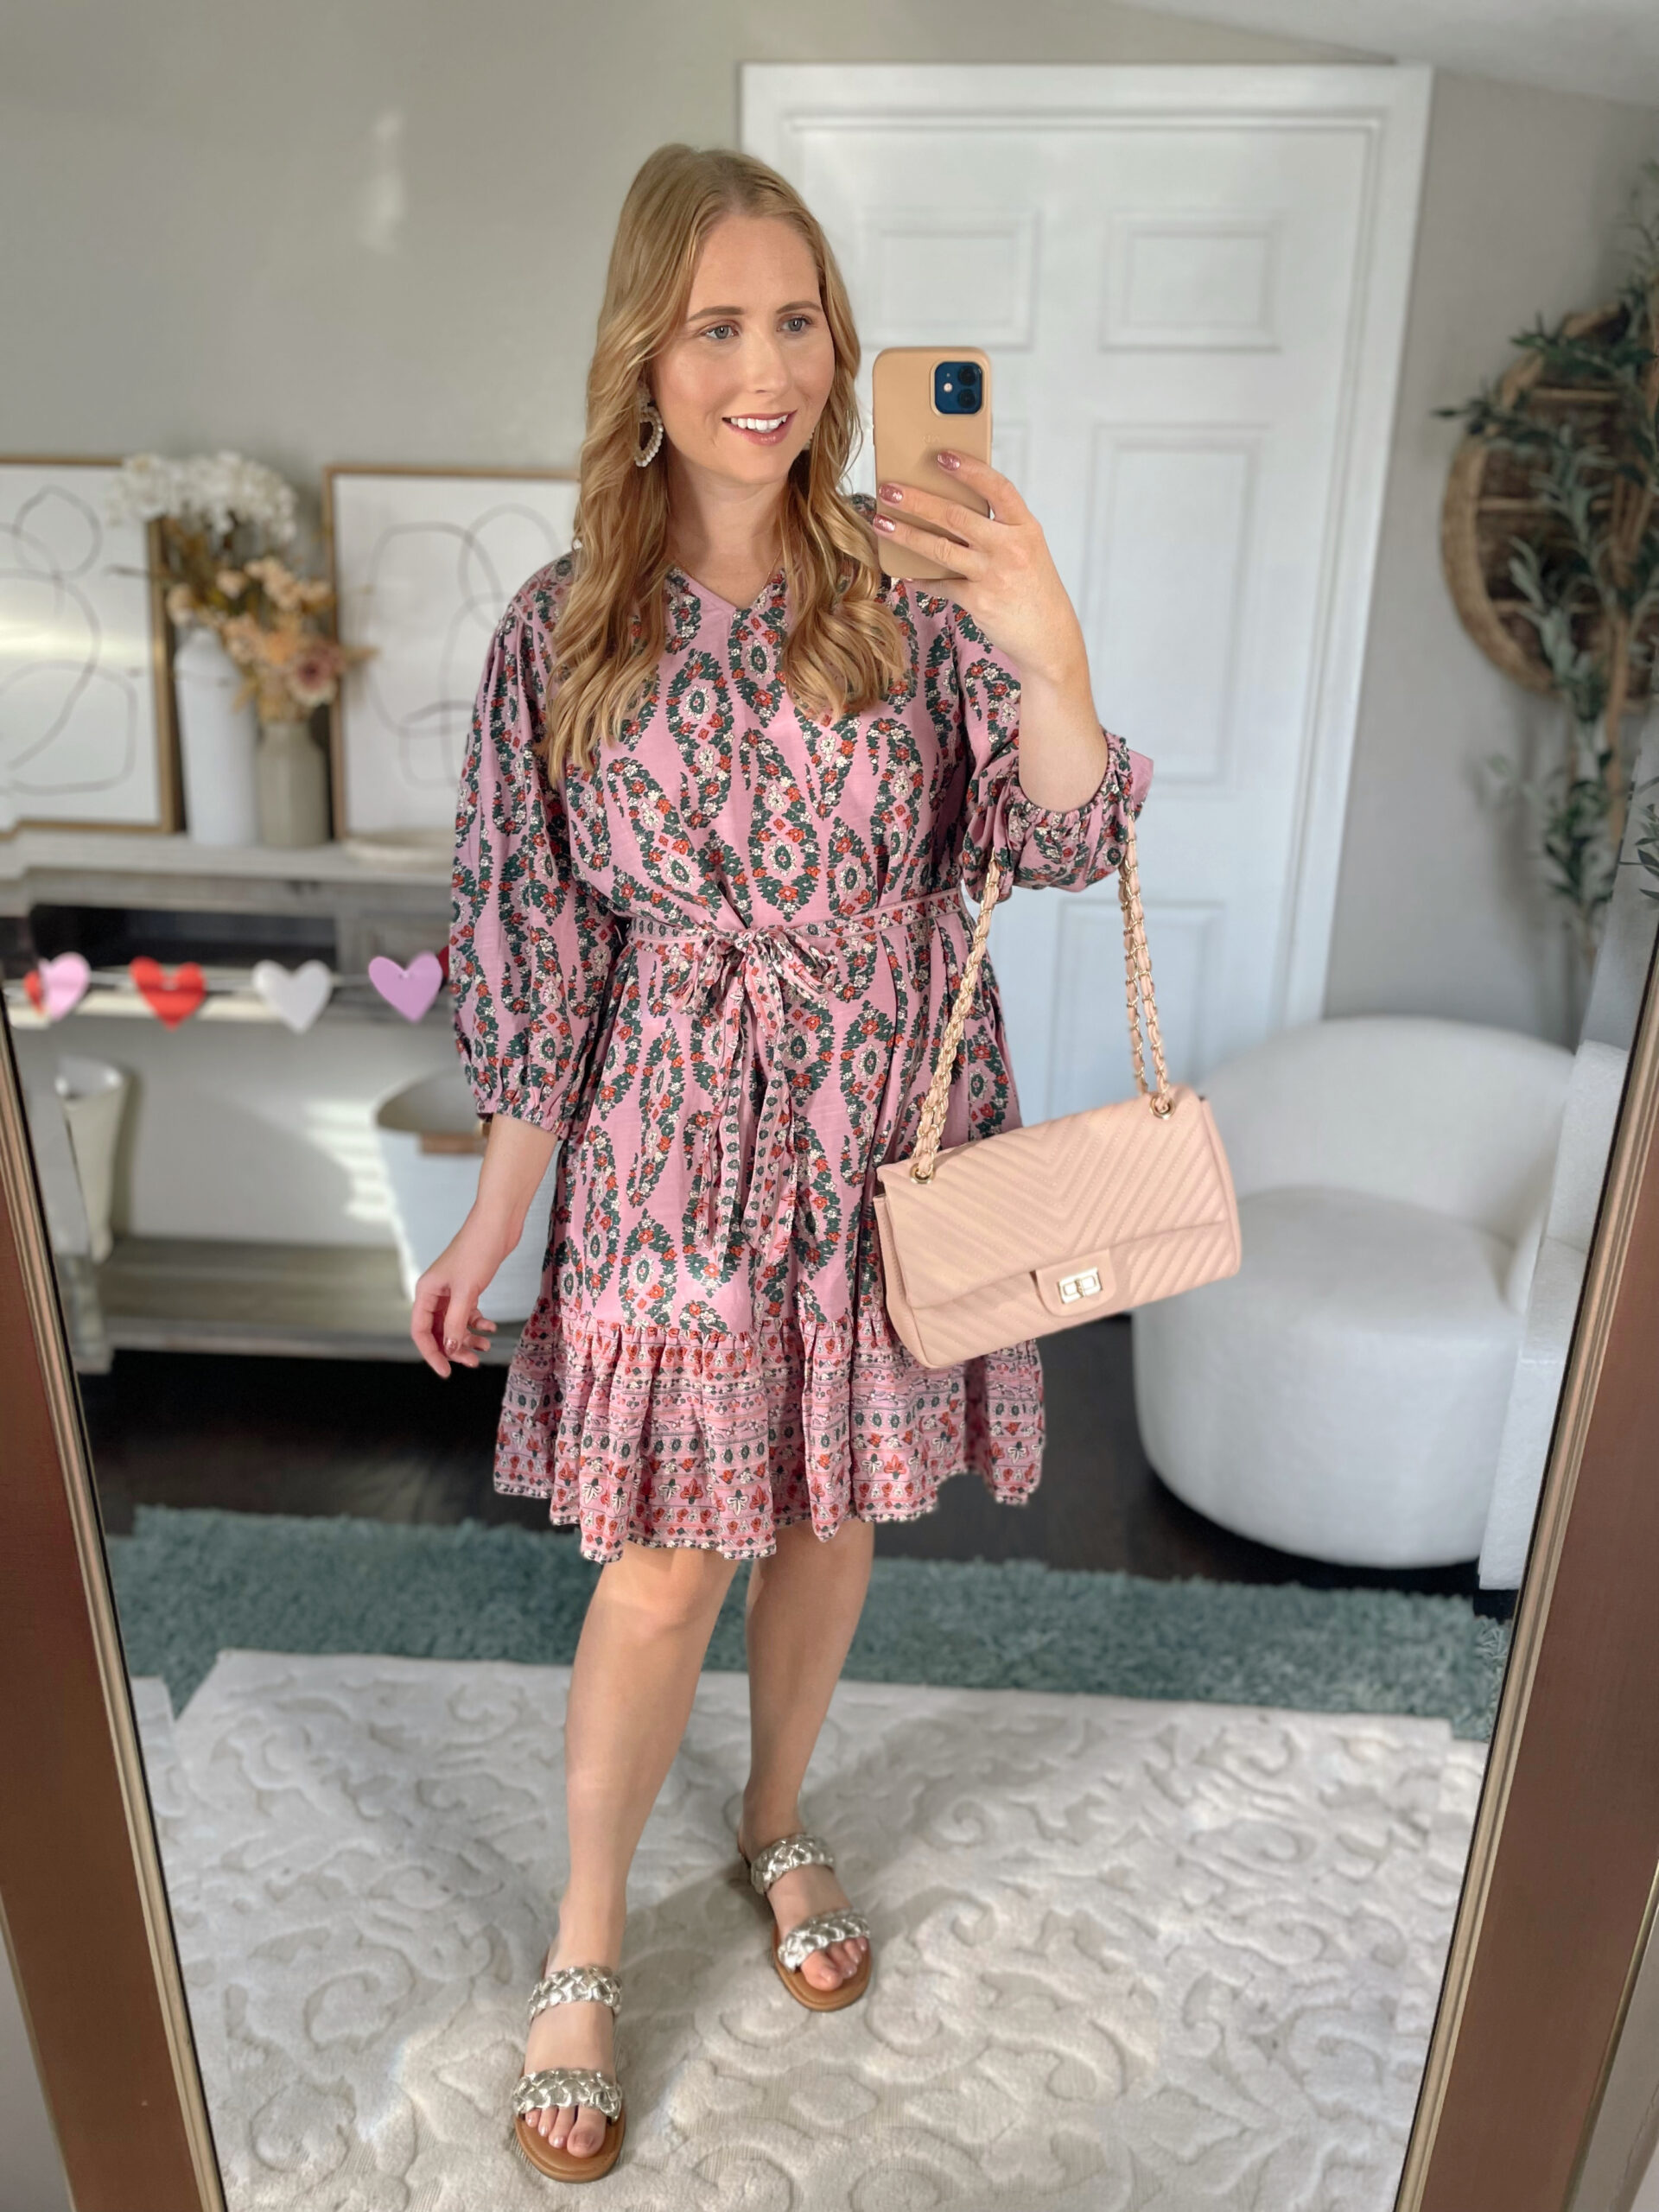 Women's 3/4 Sleeve A-Line Dress - Knox Rose™ | Most Popular Women's Clothes at Target 2023 | 20 Of The Best Target Fashion Finds For $50 or Less | Target Spring 2023 Outfits